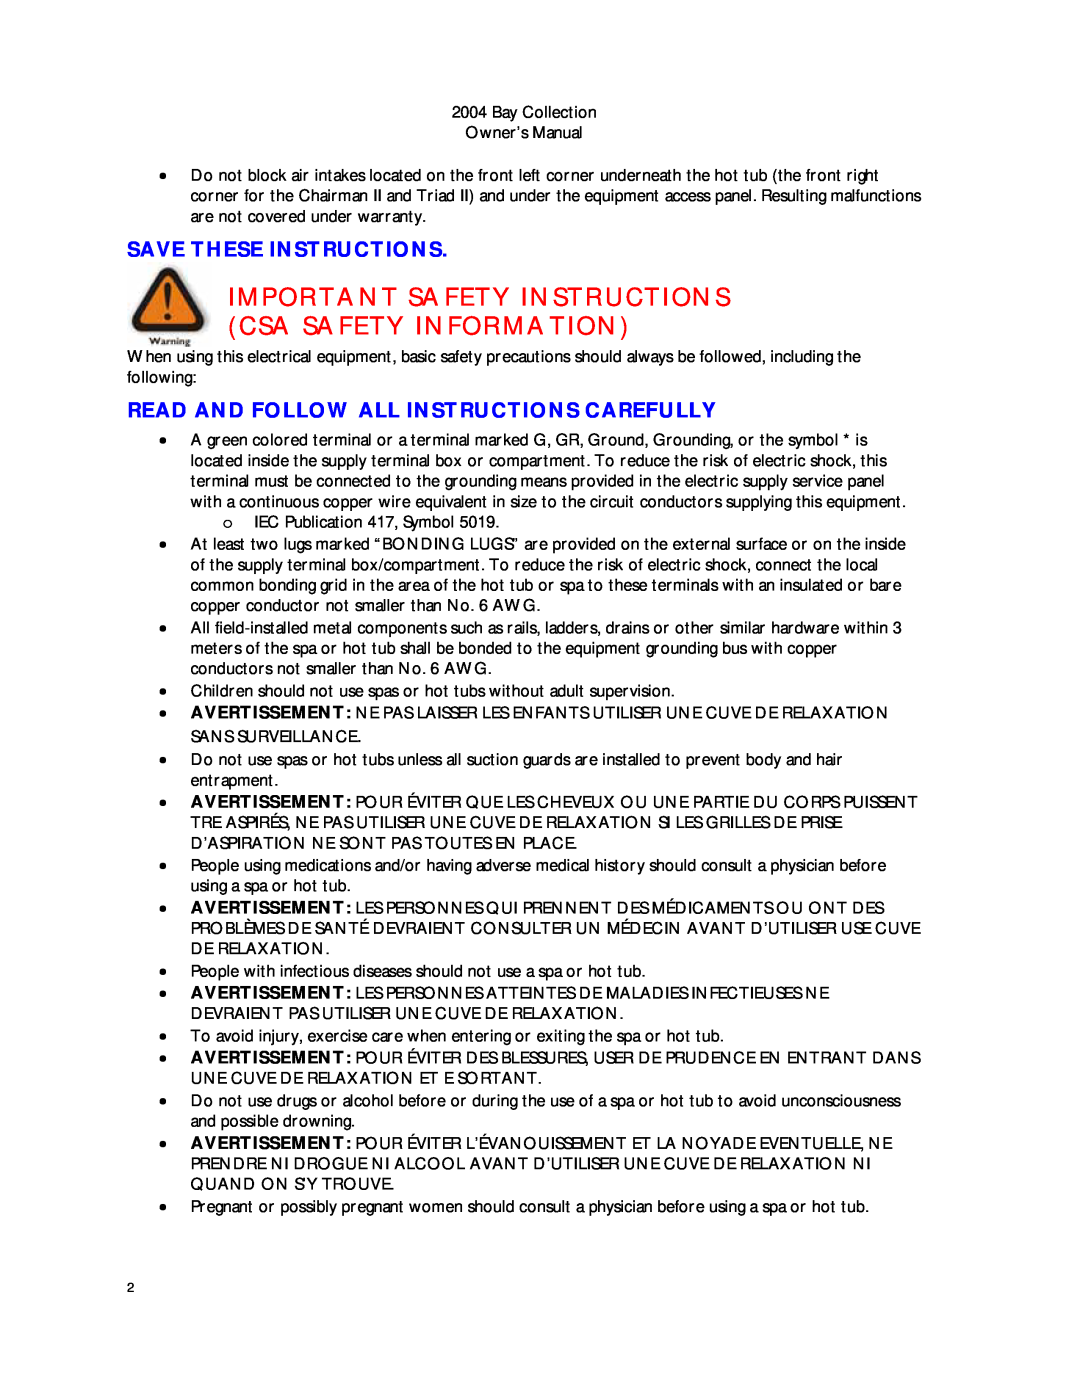 Dimension One Spas Bay Collection manual Important Safety Instructions Csa Safety Information, Save These Instructions 